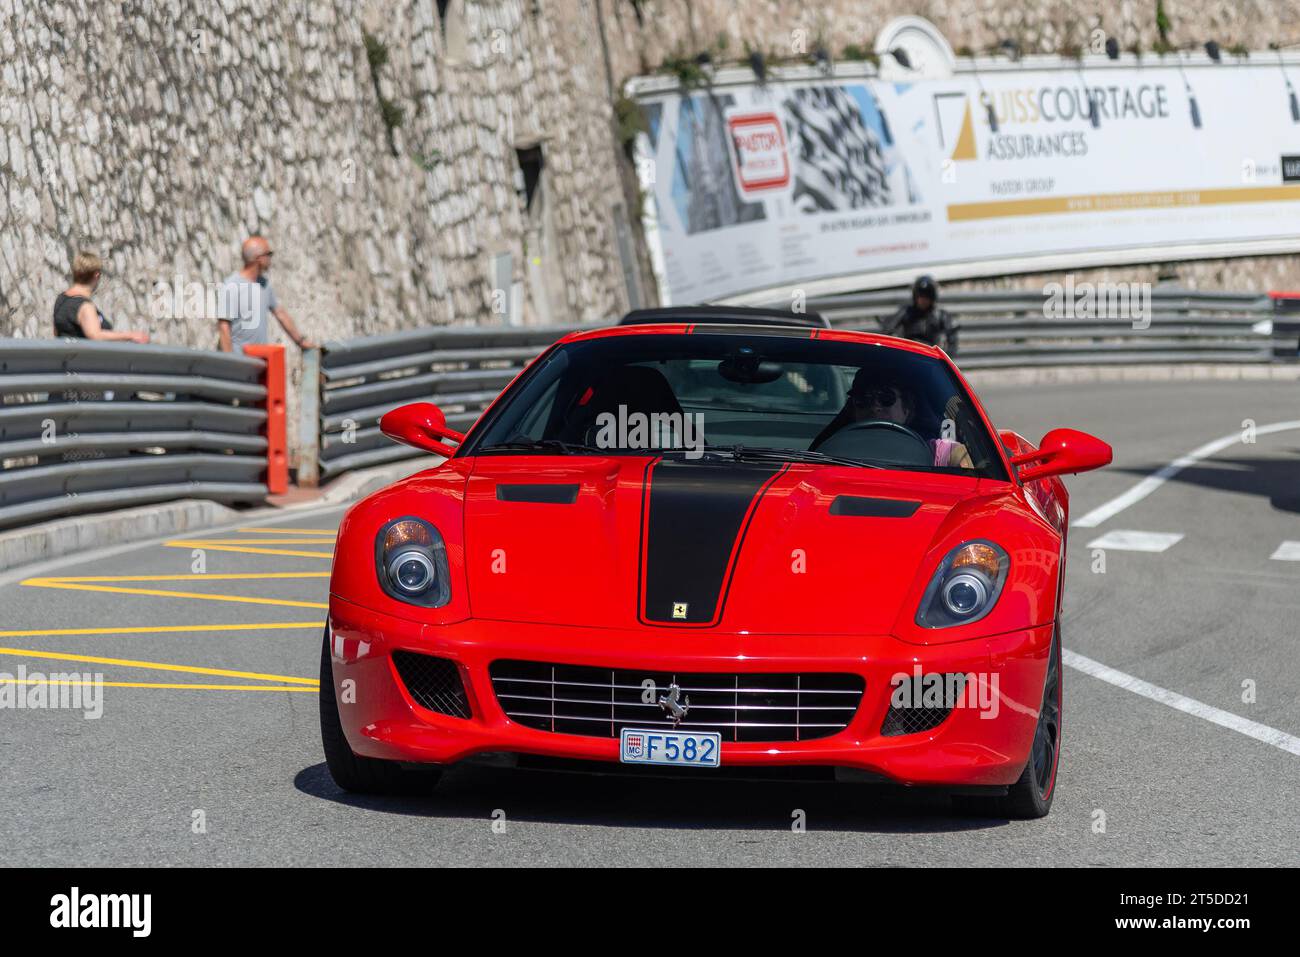 Red Ferrari 599 GTB Fiorano driving on the road in the Fairmont Hairpin Stock Photo